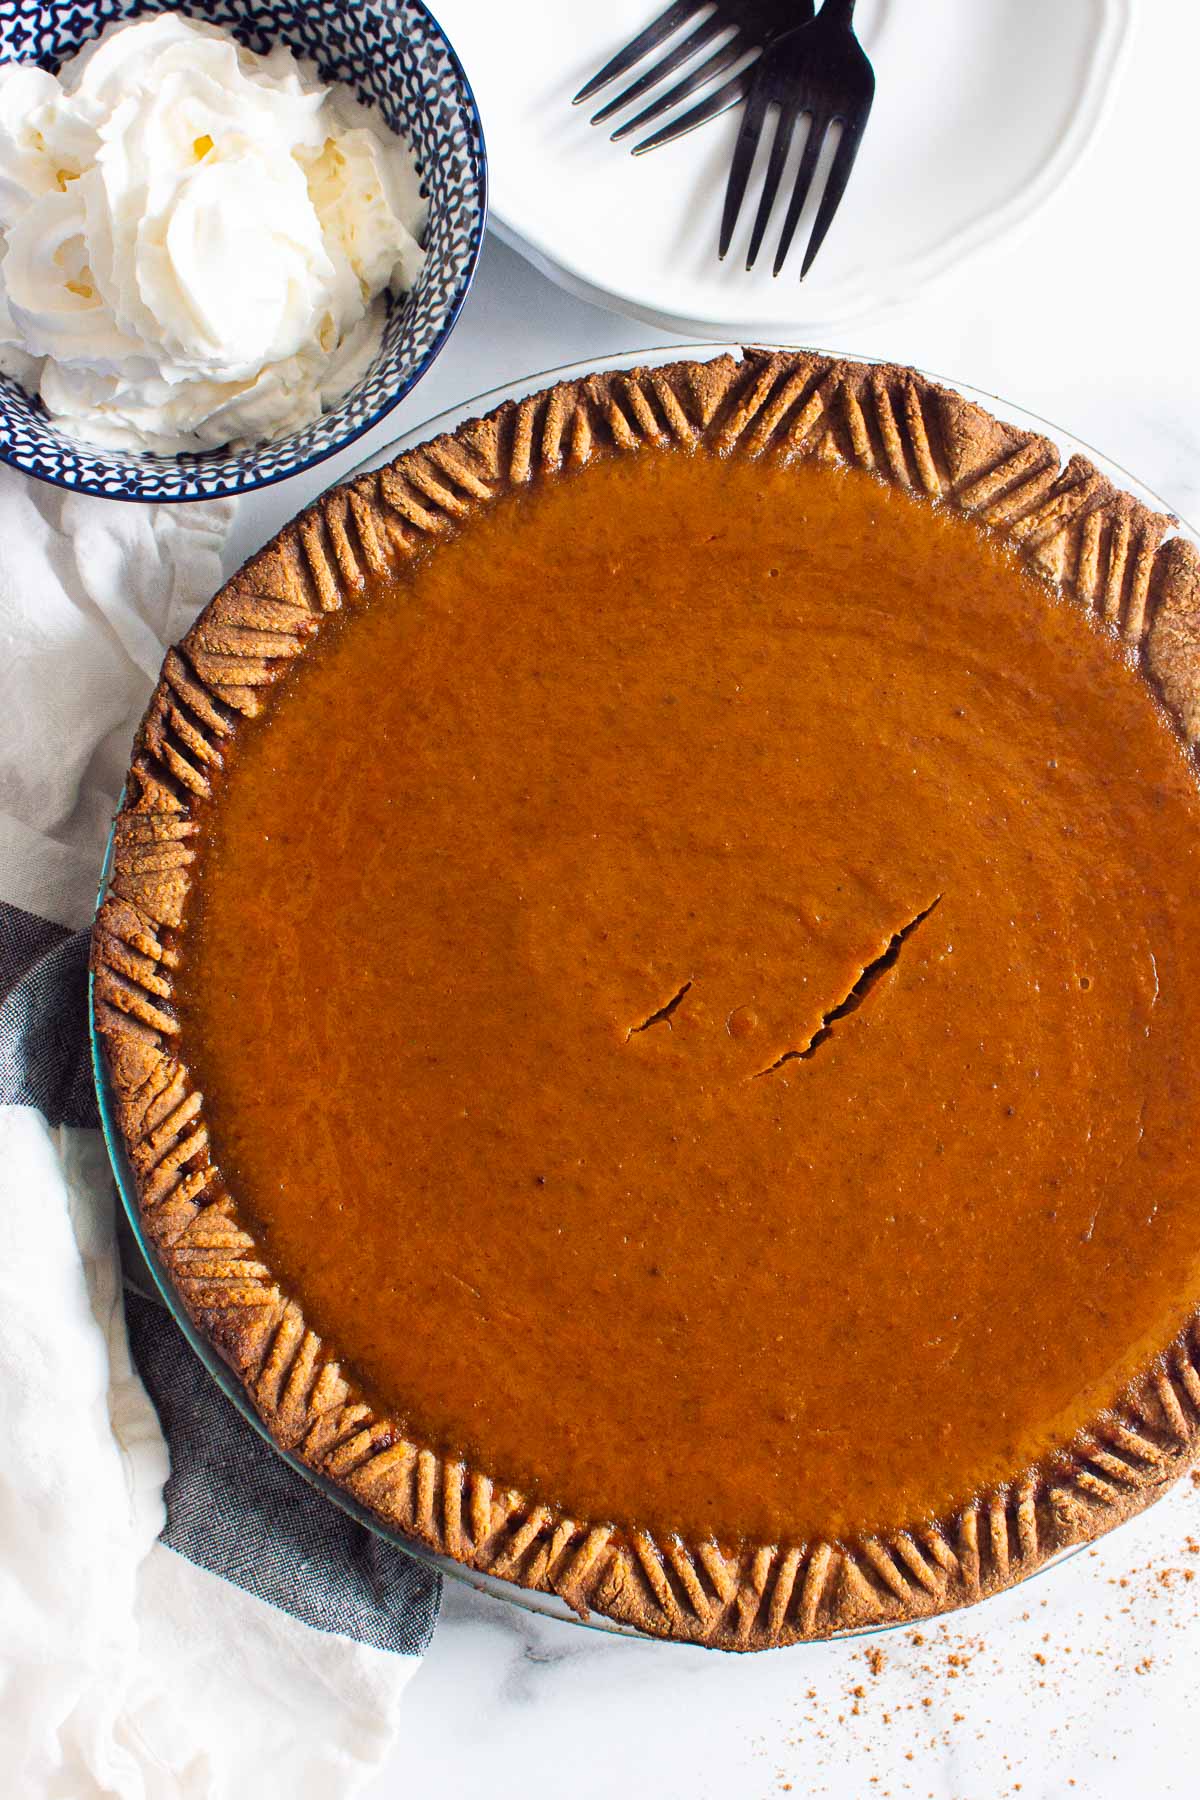 Healthy pumpkin pie with a bowl of whipped cream and forks.